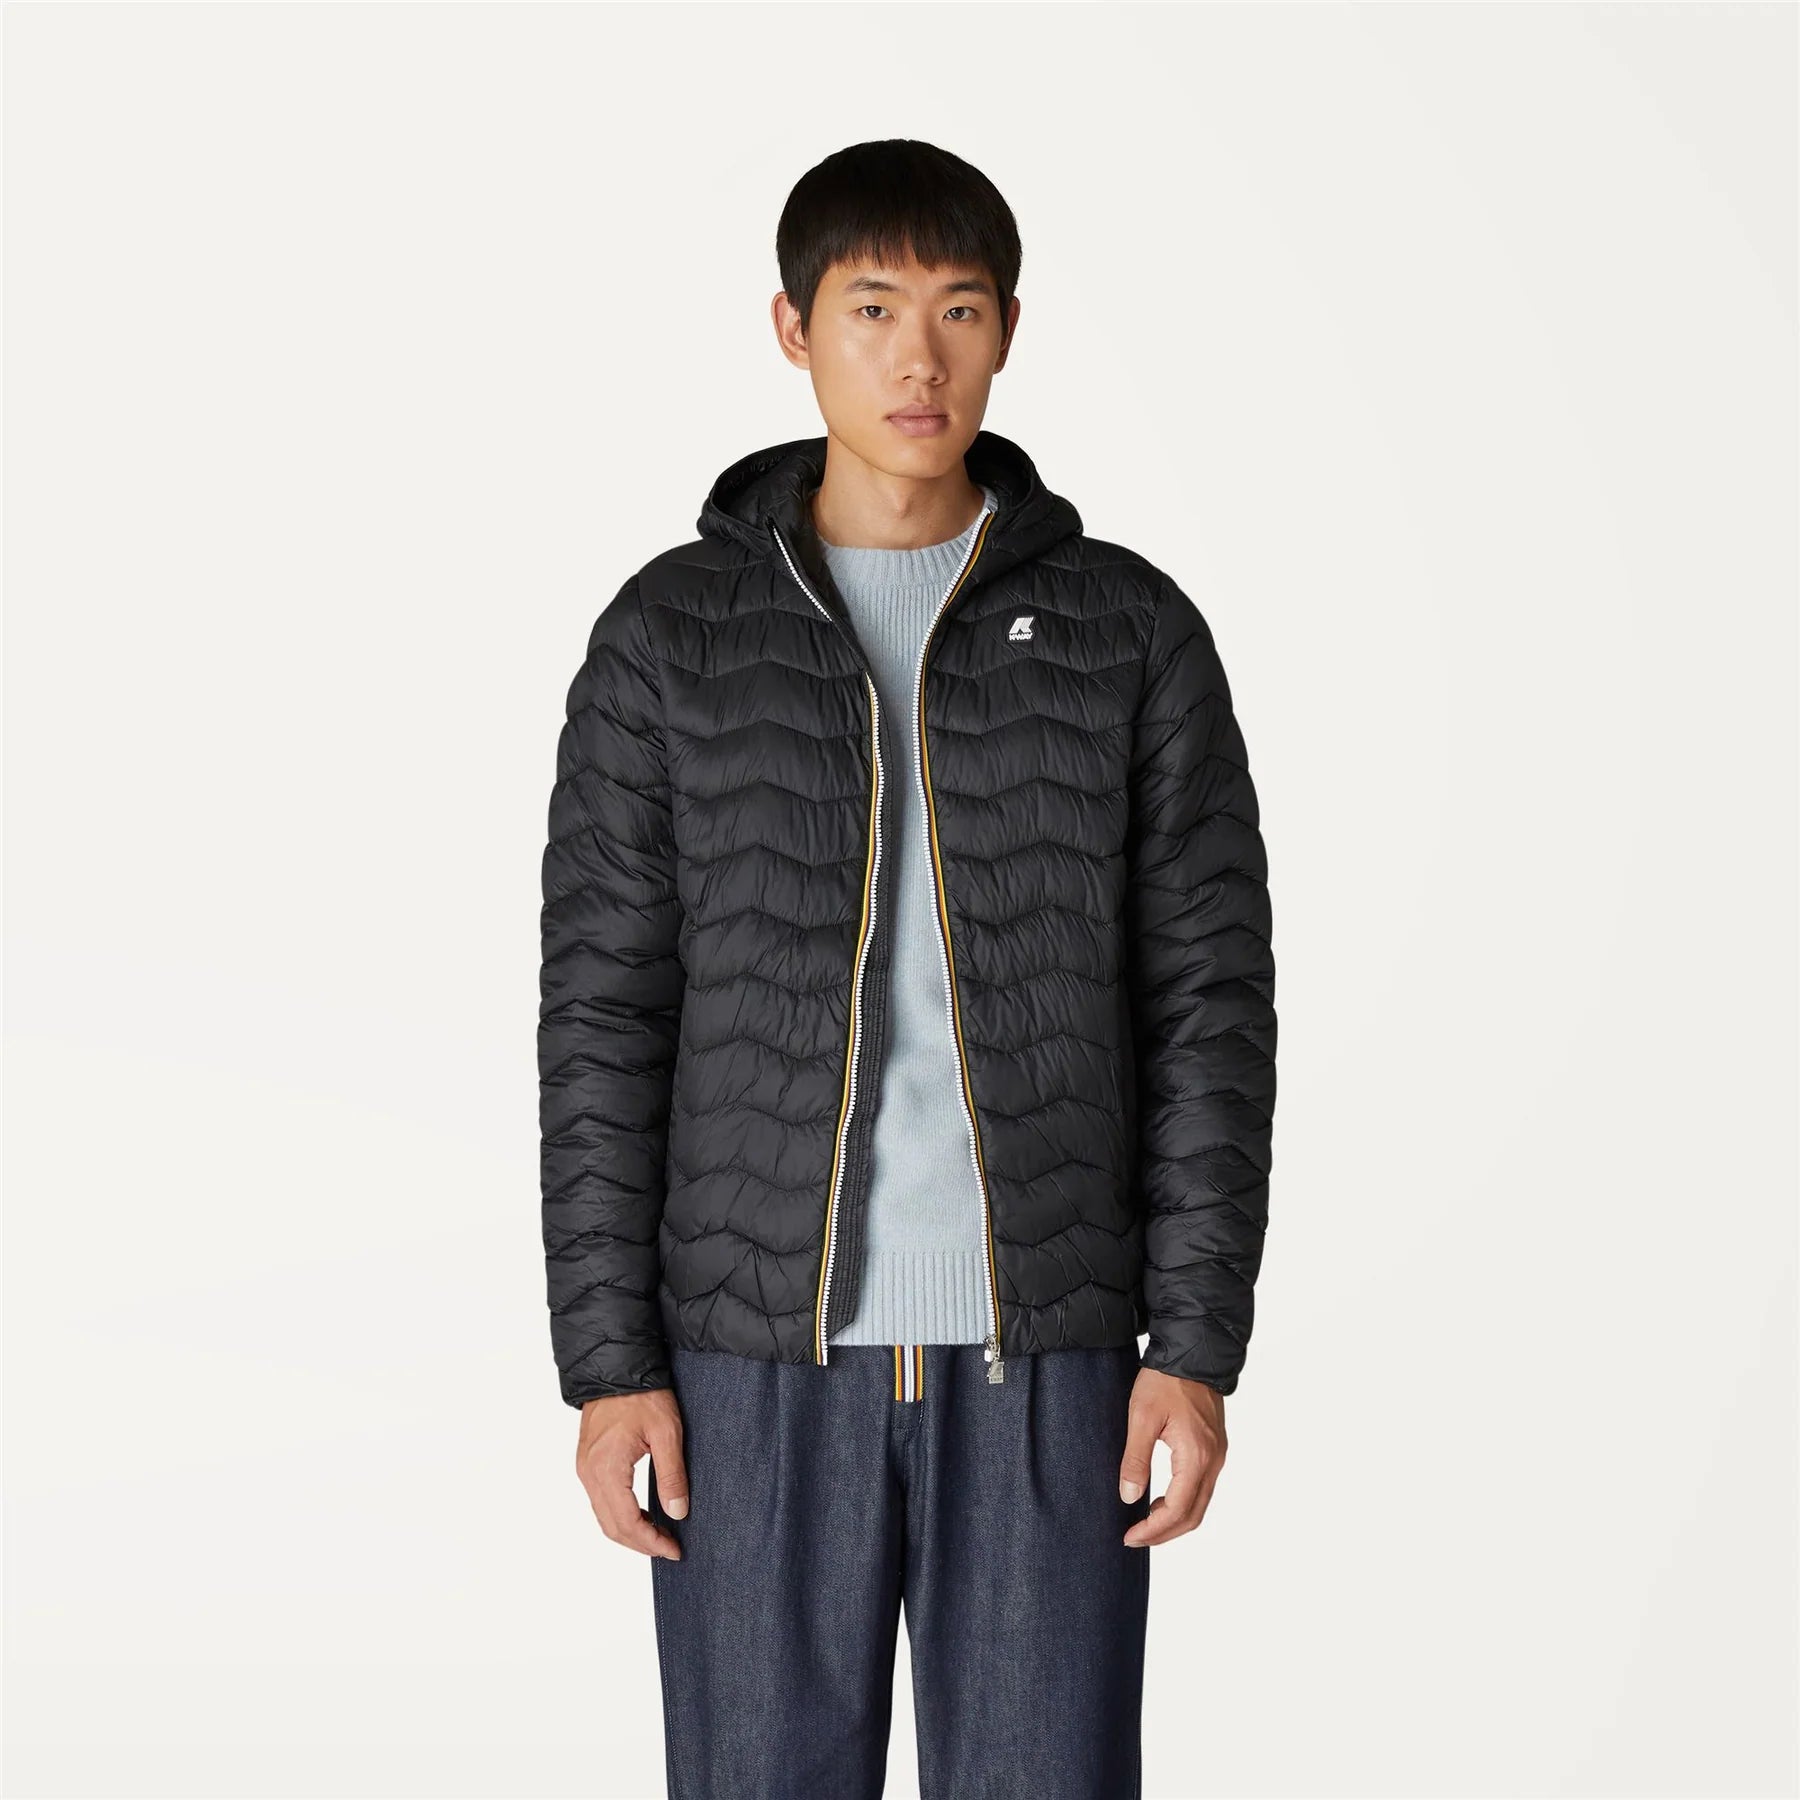 Jack Warm - Men's Quilted Packable Puffer Jacket in Black Pure